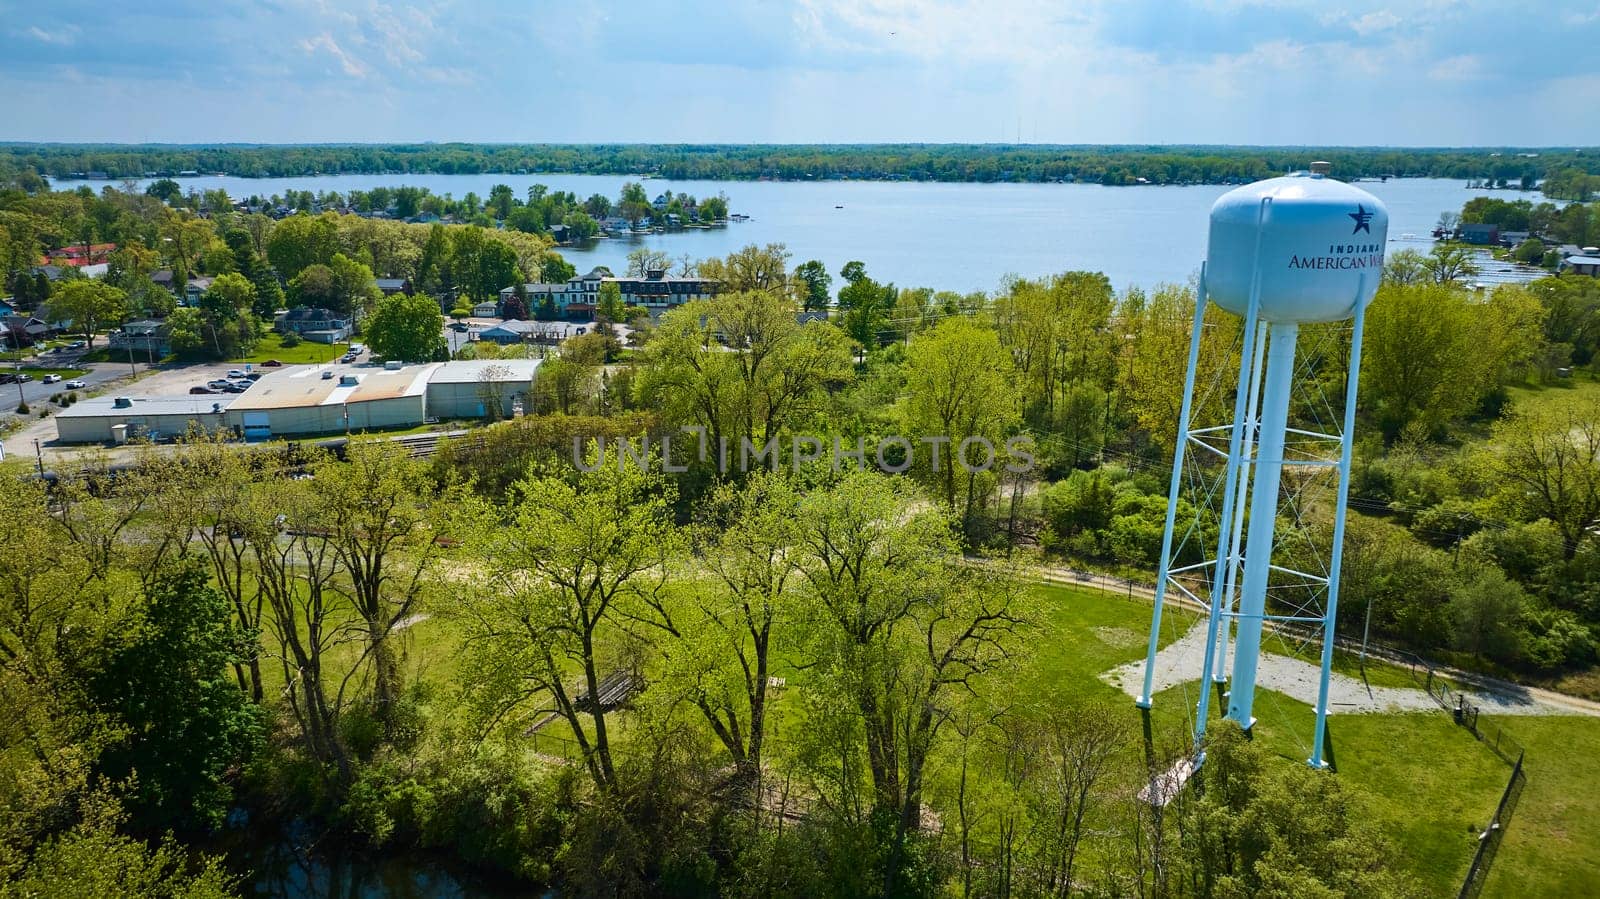 Aerial view of Indiana American Water tower, surrounded by lush greenery and a lively lake community.